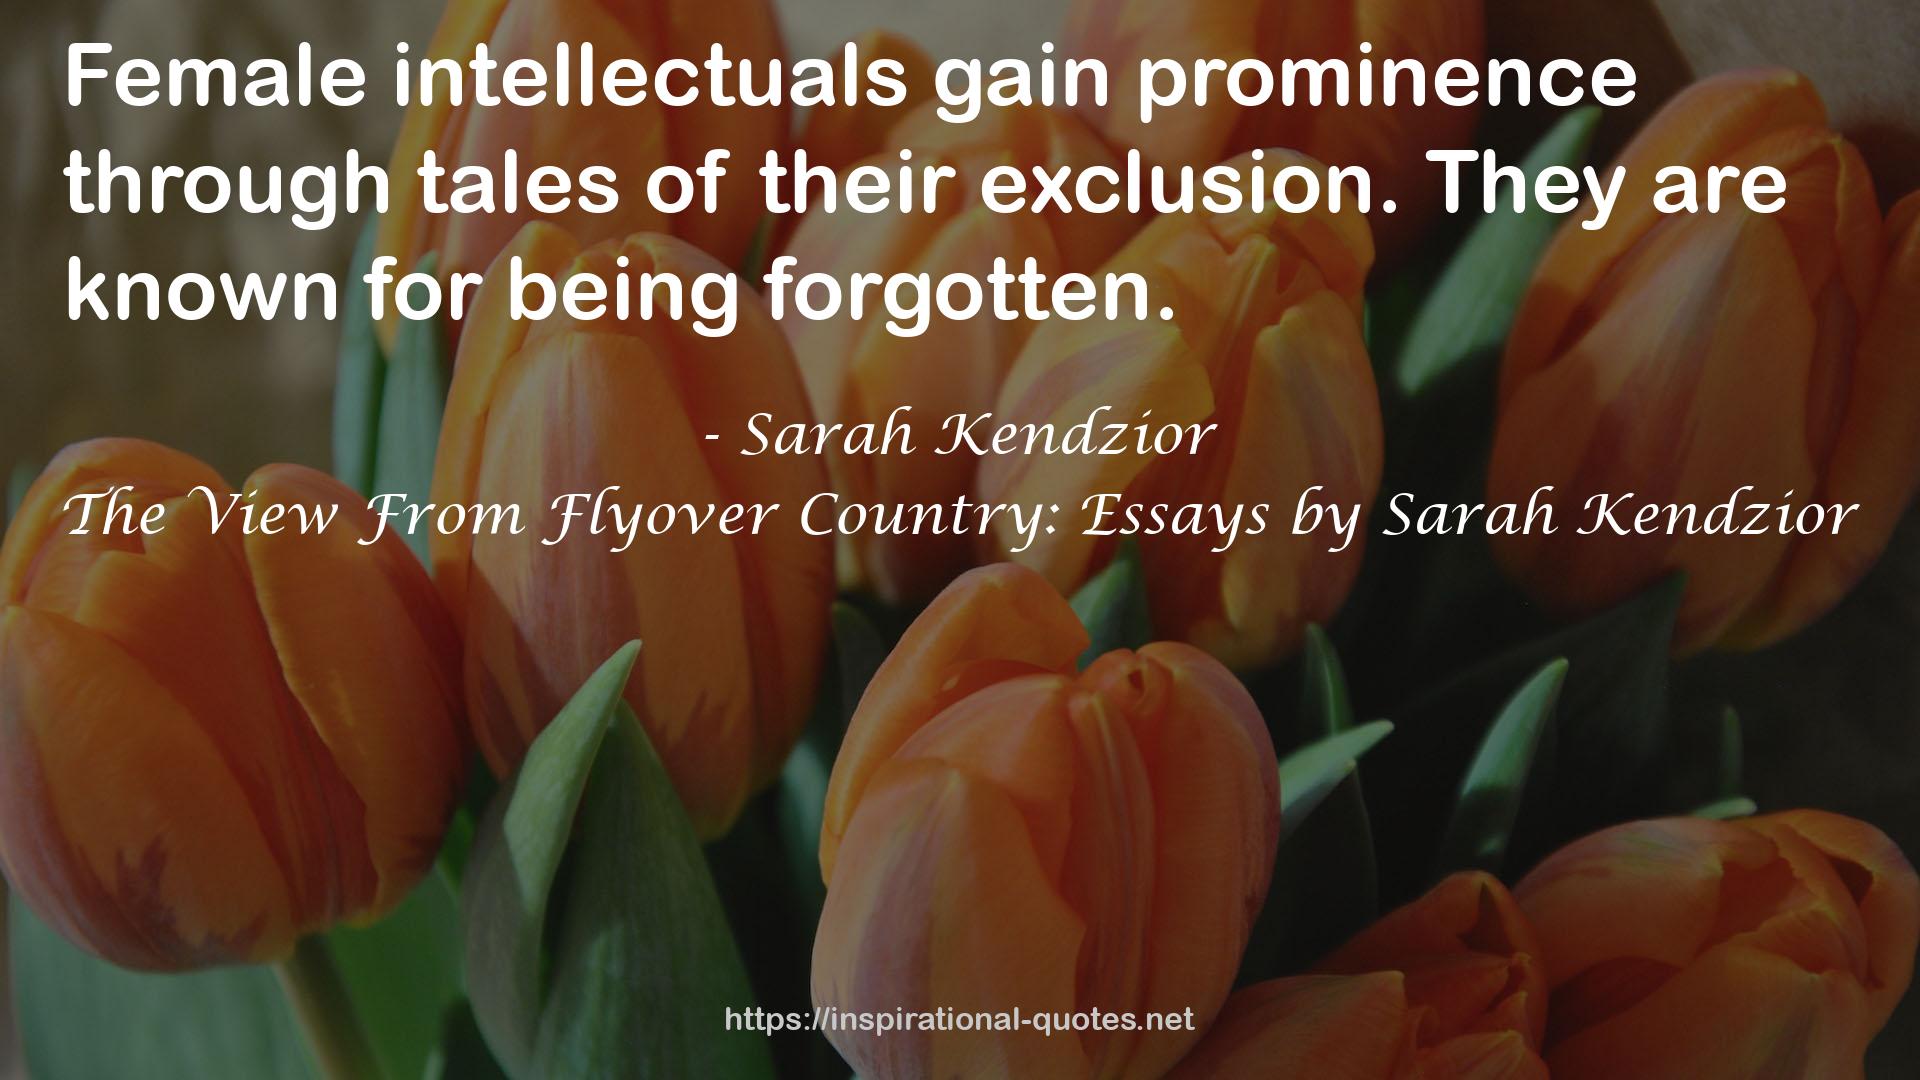 The View From Flyover Country: Essays by Sarah Kendzior QUOTES